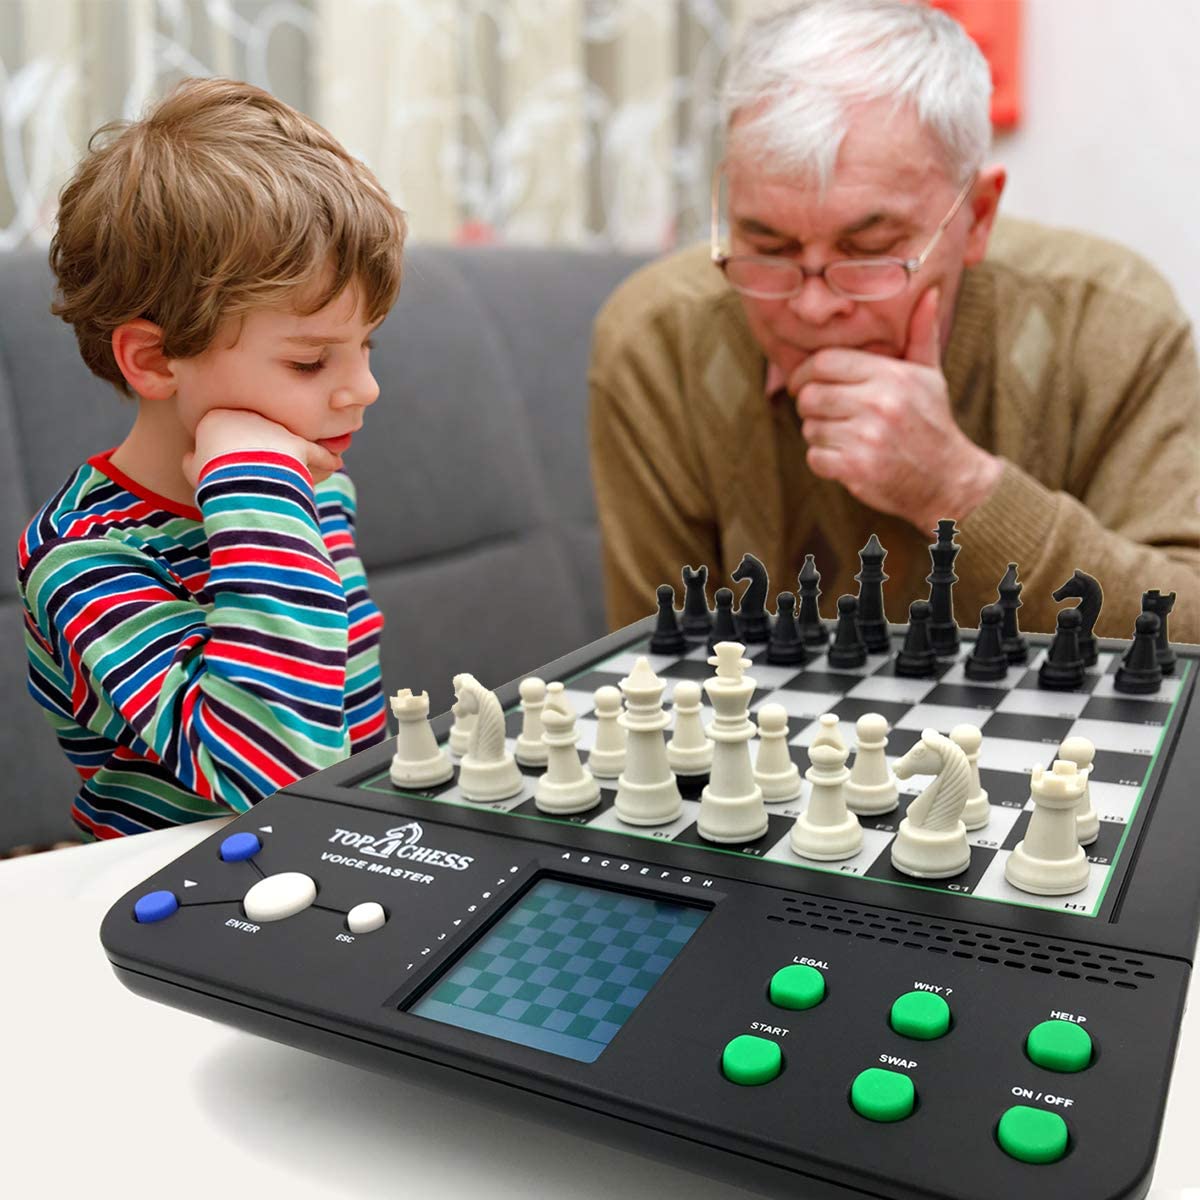 Top 1 Chess Electronic Chess Set | Chess Sets for Adults | Chess Set for Kids | Voice Chess Computer Teaching System | Chess Strategy Beginners Improving | Large Screen Learning Chess Set Board Game - image 3 of 7